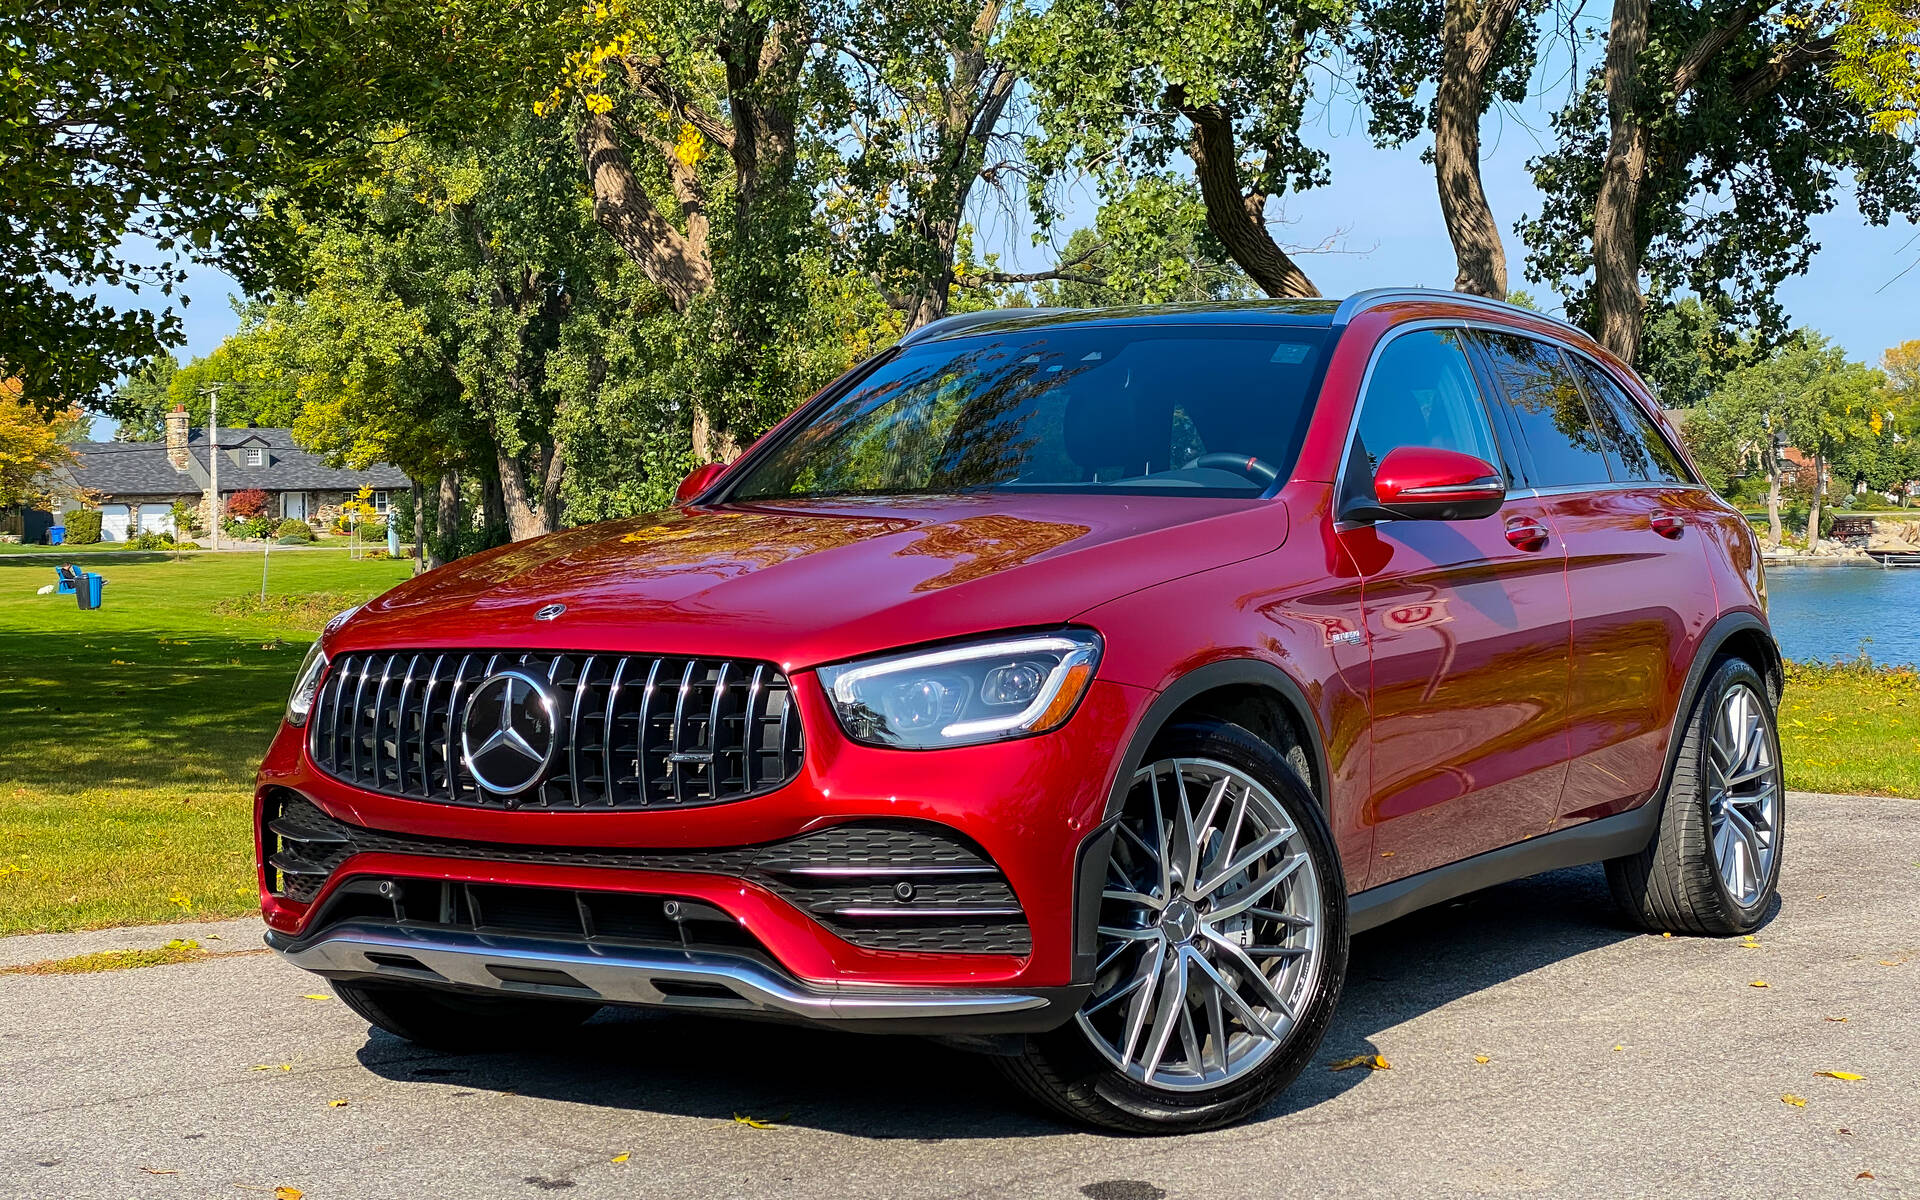 What Are The Engine Specs Of The 2022 Mercedes-Benz GLC?